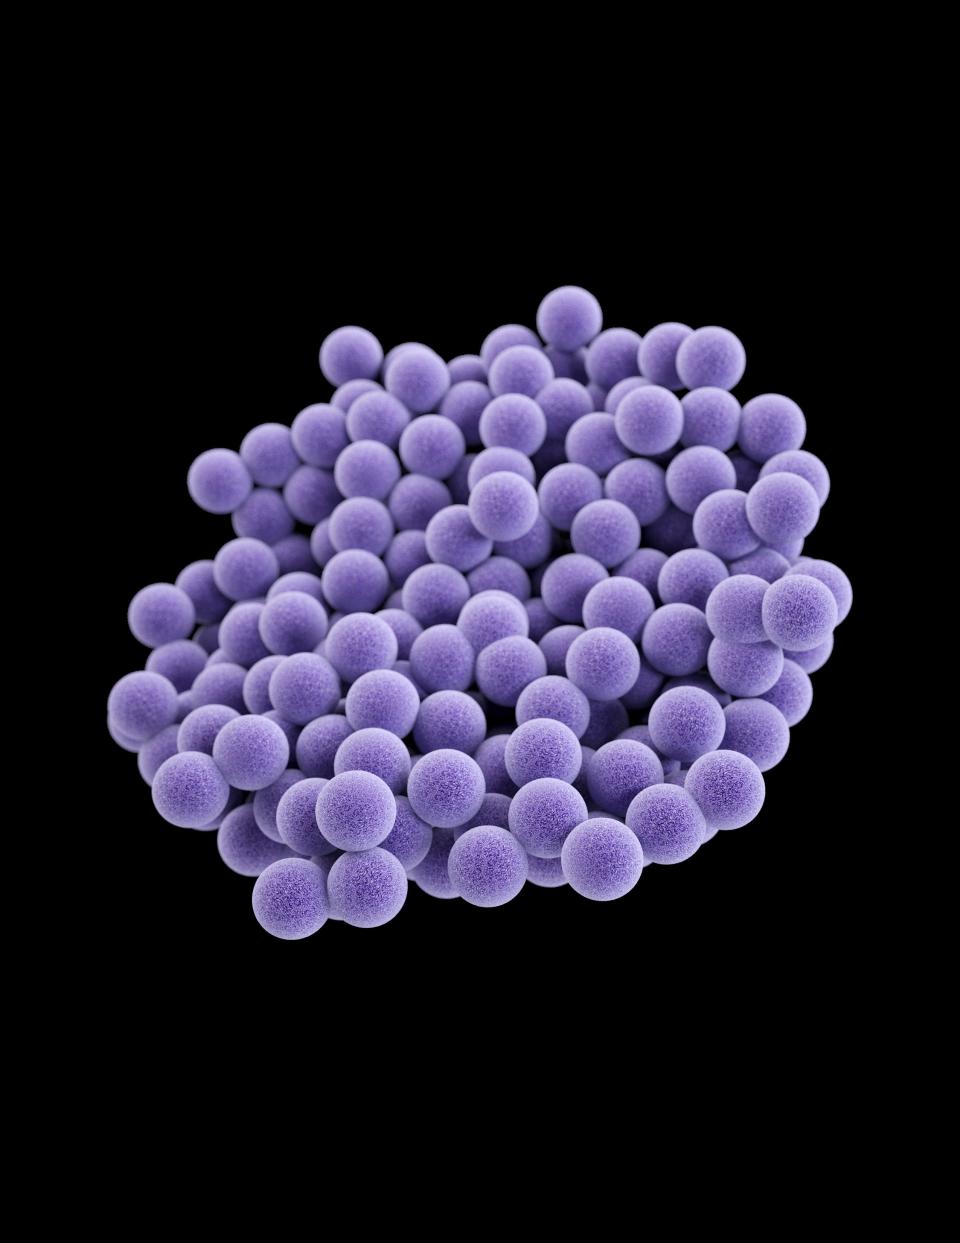 A cluster of methicillin-resistant Staphylococcus aureus (MRSA) bacteria. MRSA can cause skin infections, blood stream infections and pneumonia. For Kim Painter's story on the World Health Organization sounding the alarm on rising levels of antibiotic resistance.